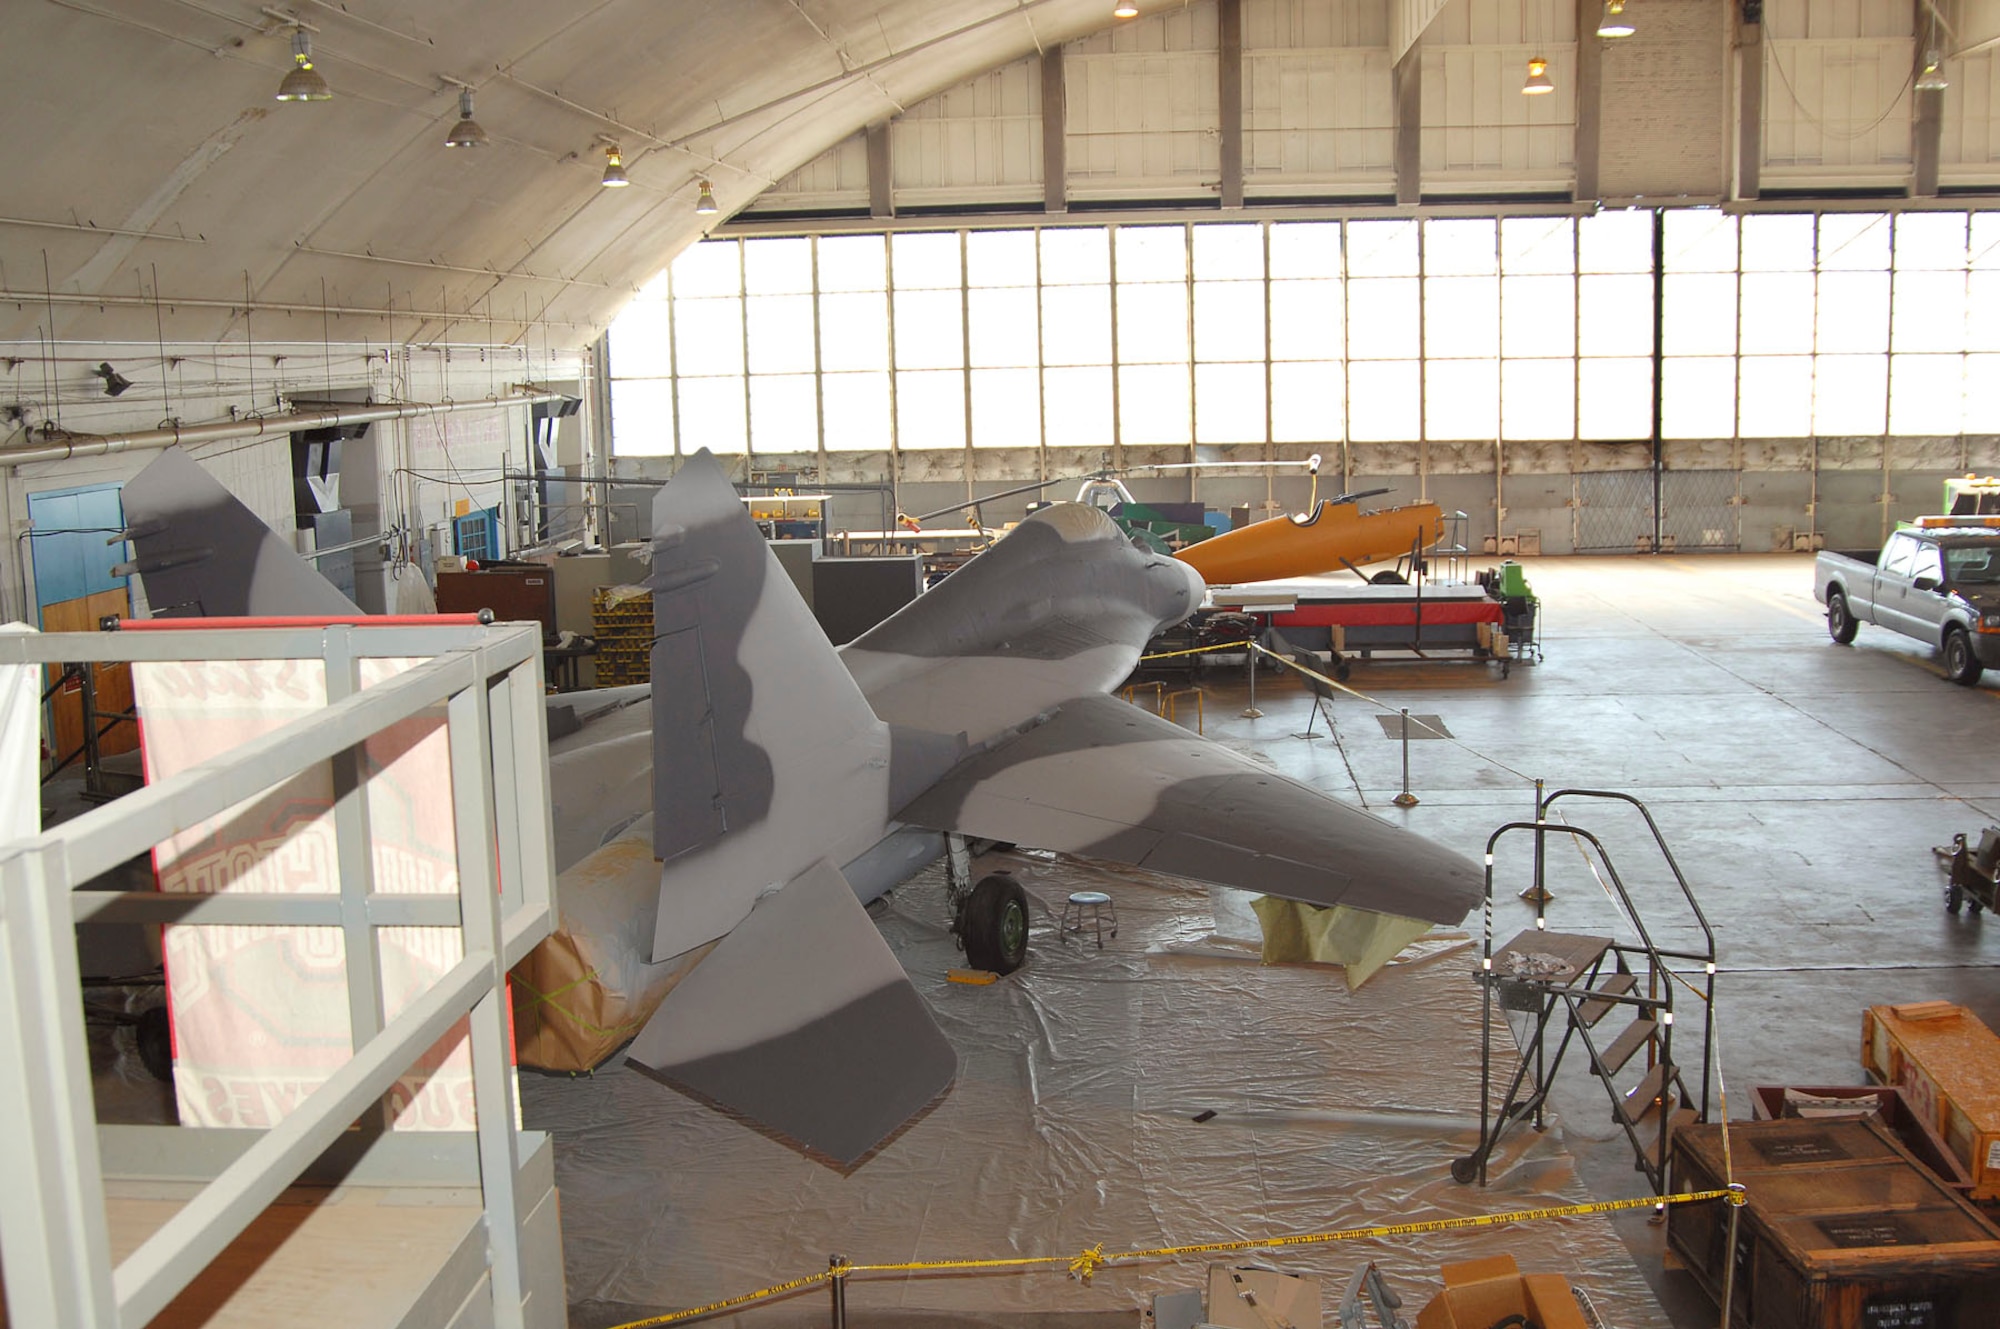 DAYTON, Ohio (02/2007) - The MiG-29A in the restoration area of the National Museum of the U.S. Air Force. (U.S. Air Force photo by Ben Strasser)